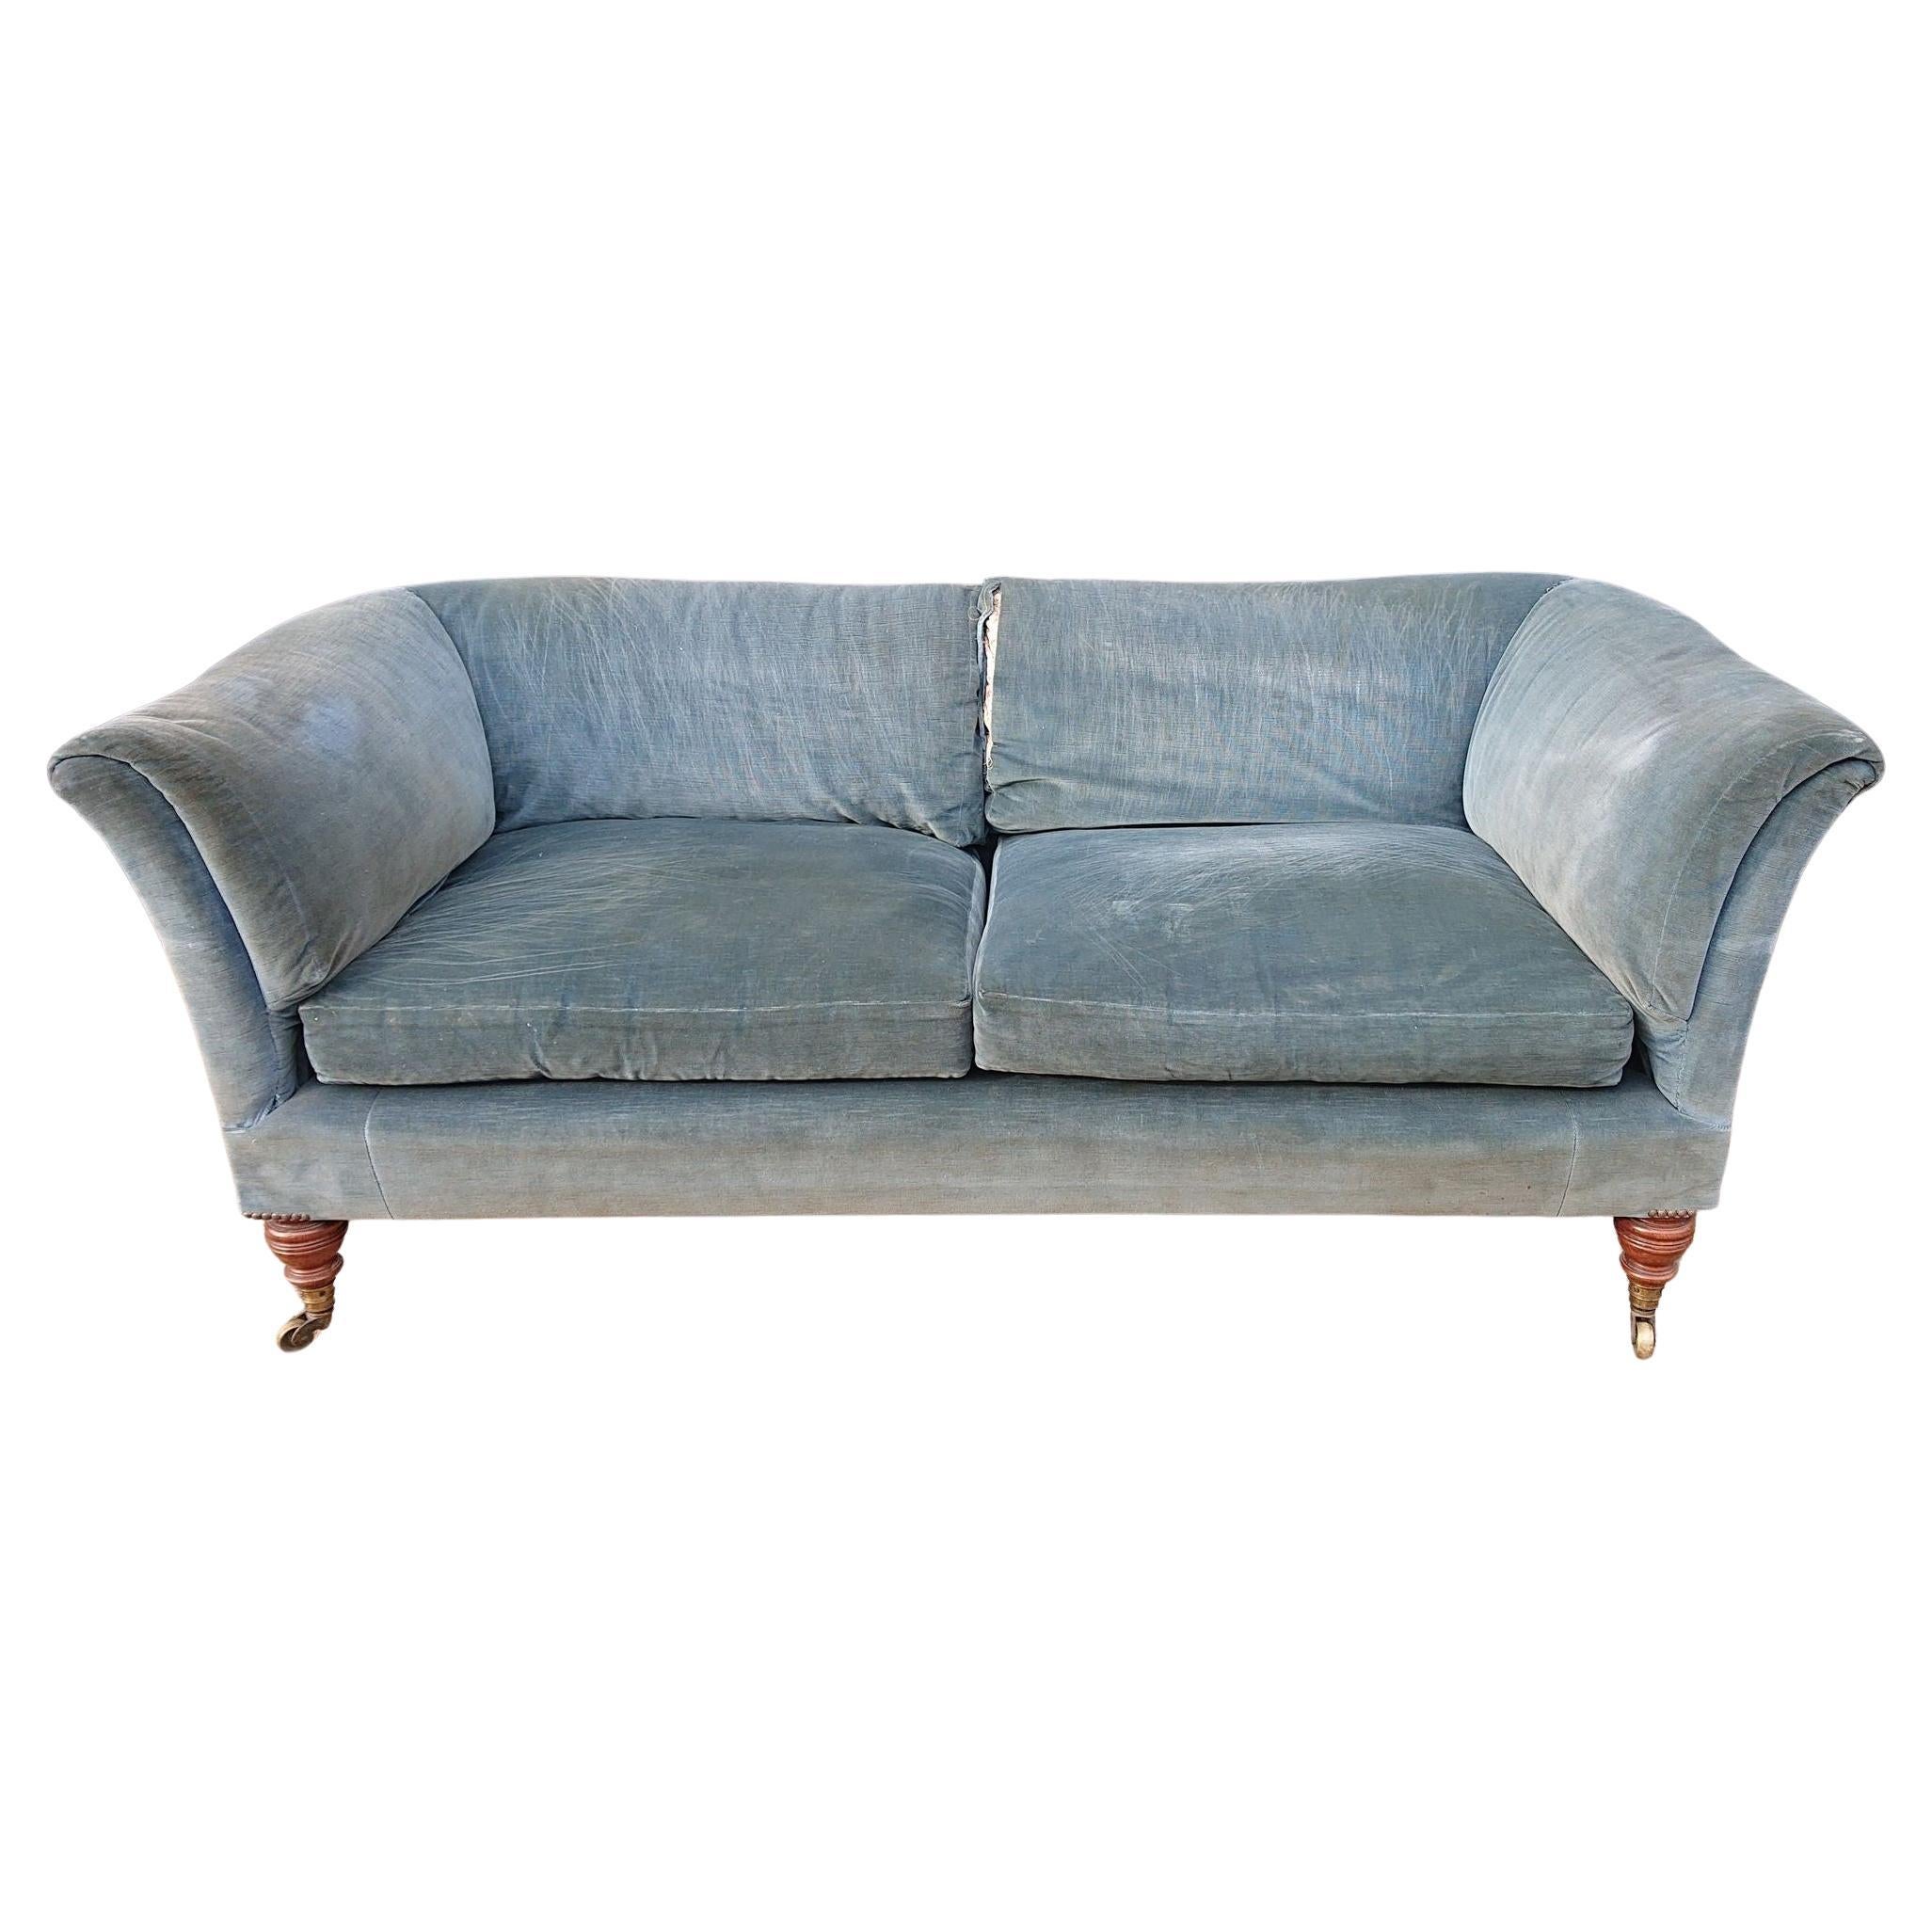 "Baring" Sofa by Howard and Sons of London circa 1900 For Sale